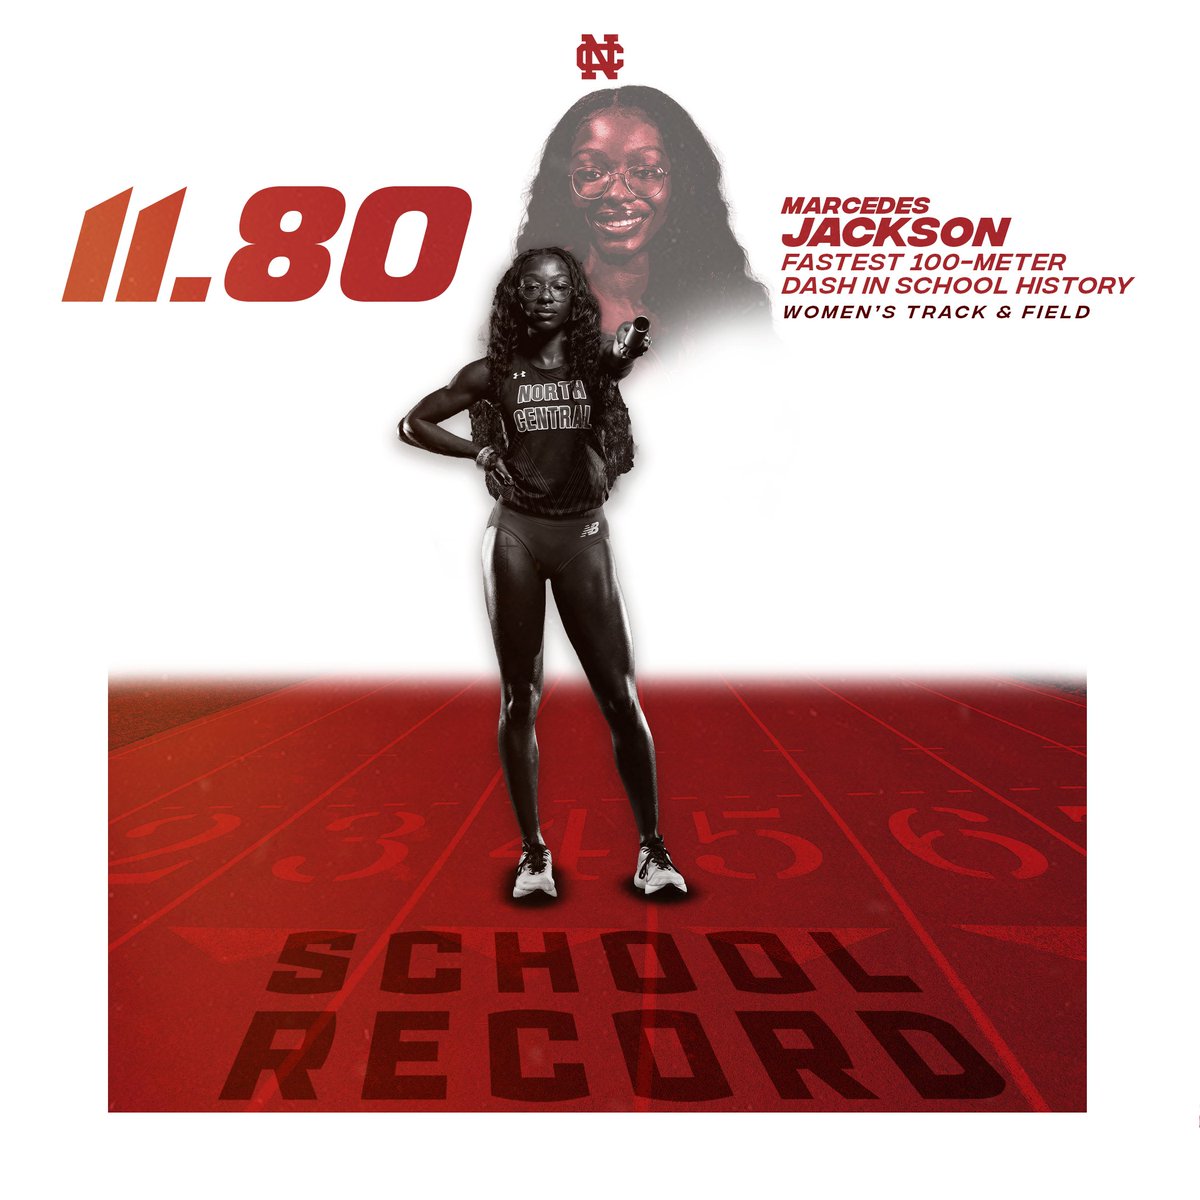 Last Saturday (Apr. 13), at the Wheaton College Invitational, Marcedes Jackson of @nccwomensxctf set a new program record in the 100-meter dash. Jackson completed the event in a jaw-dropping 11.80 seconds! #WeAreNC